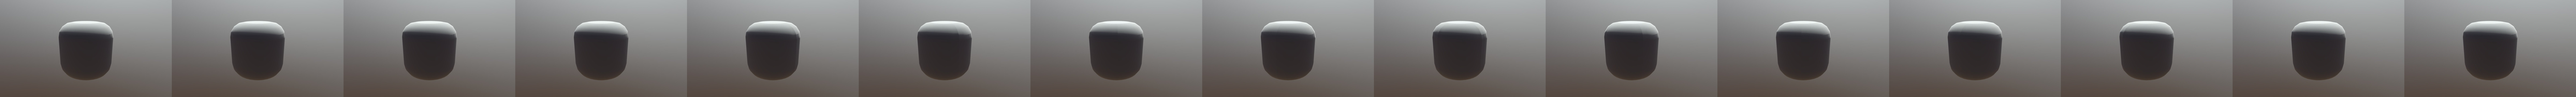 Roblox Head For Blender Download Free 3d Model By Sdfgh13s Sdfgh13s Fd06103 Sketchfab - making ugc roblox hats on blender